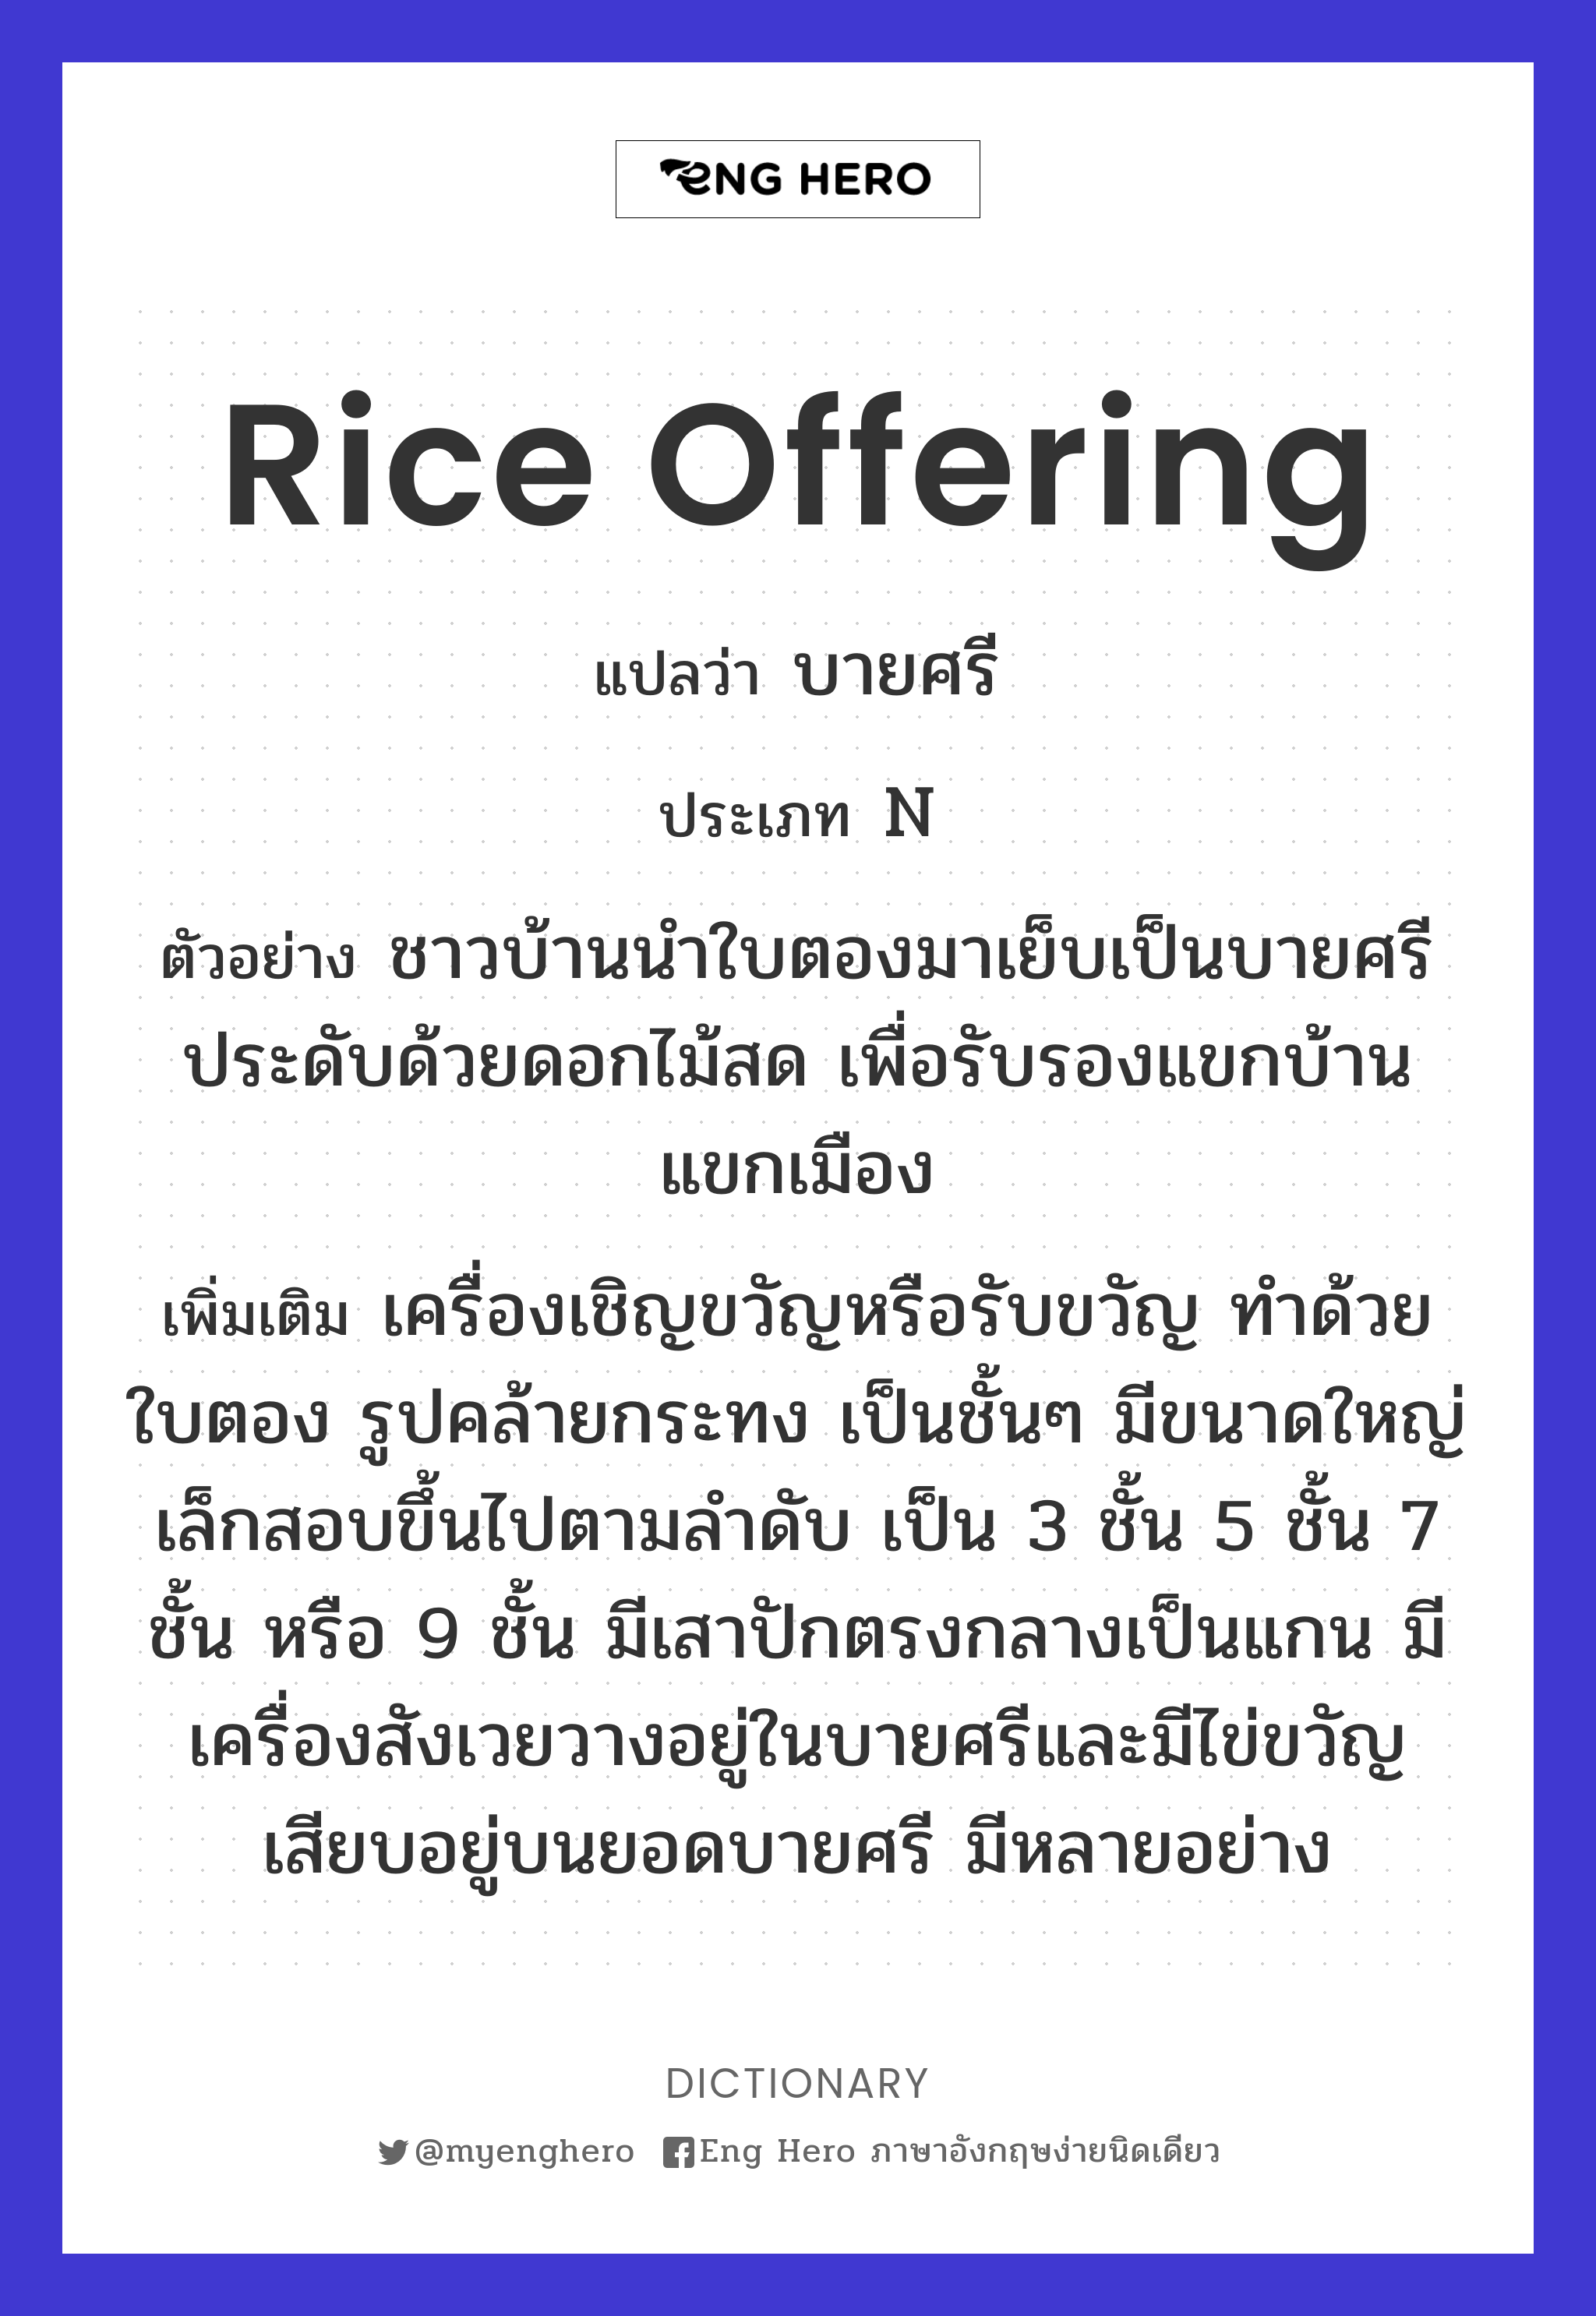 rice offering